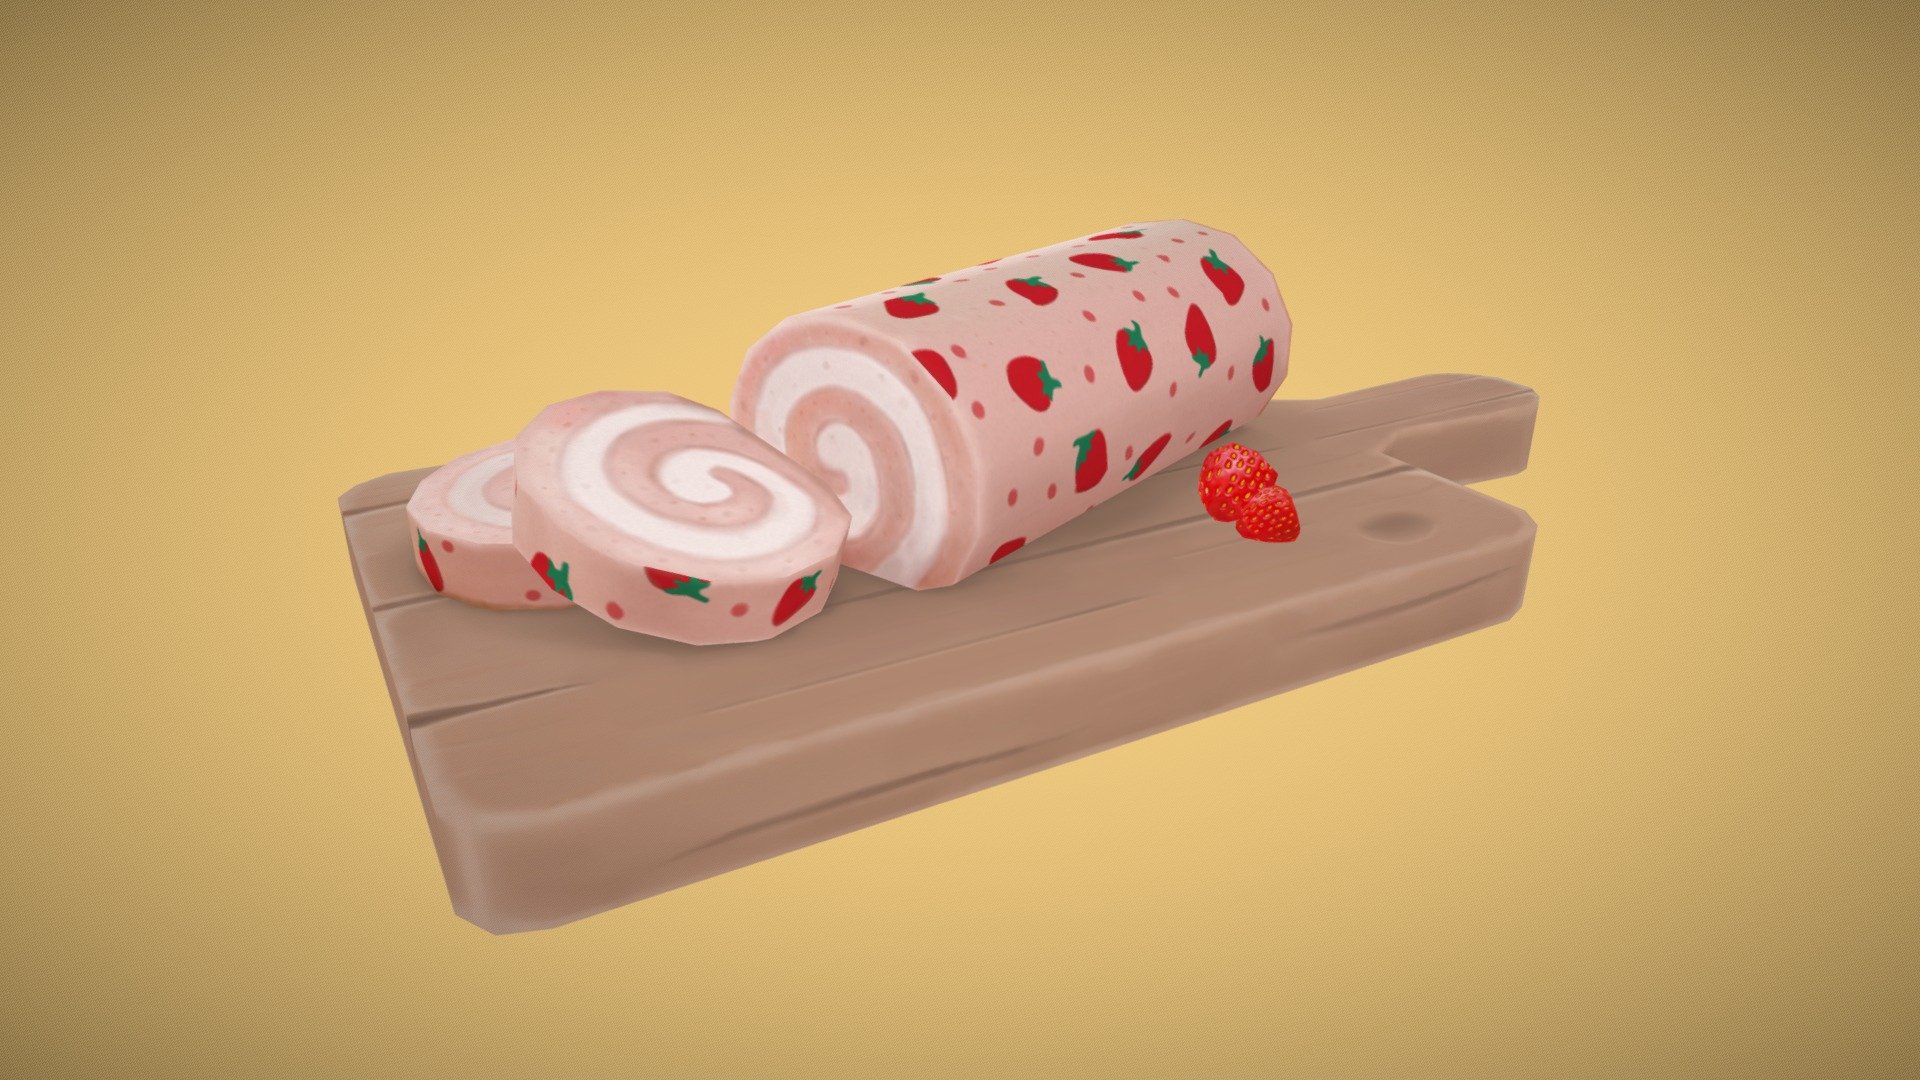 I made this adorable strawberry cake roll for the #lowpolydessertchallenge. I based it off this recipe I saw a little while ago, it looks so tasty and cute! I'd like to try baking it at some point, but for now I made it in 3d :D - Strawberry Cake Roll - 3D model by Lizabeth Leers (@lizabeth3d) 3d model